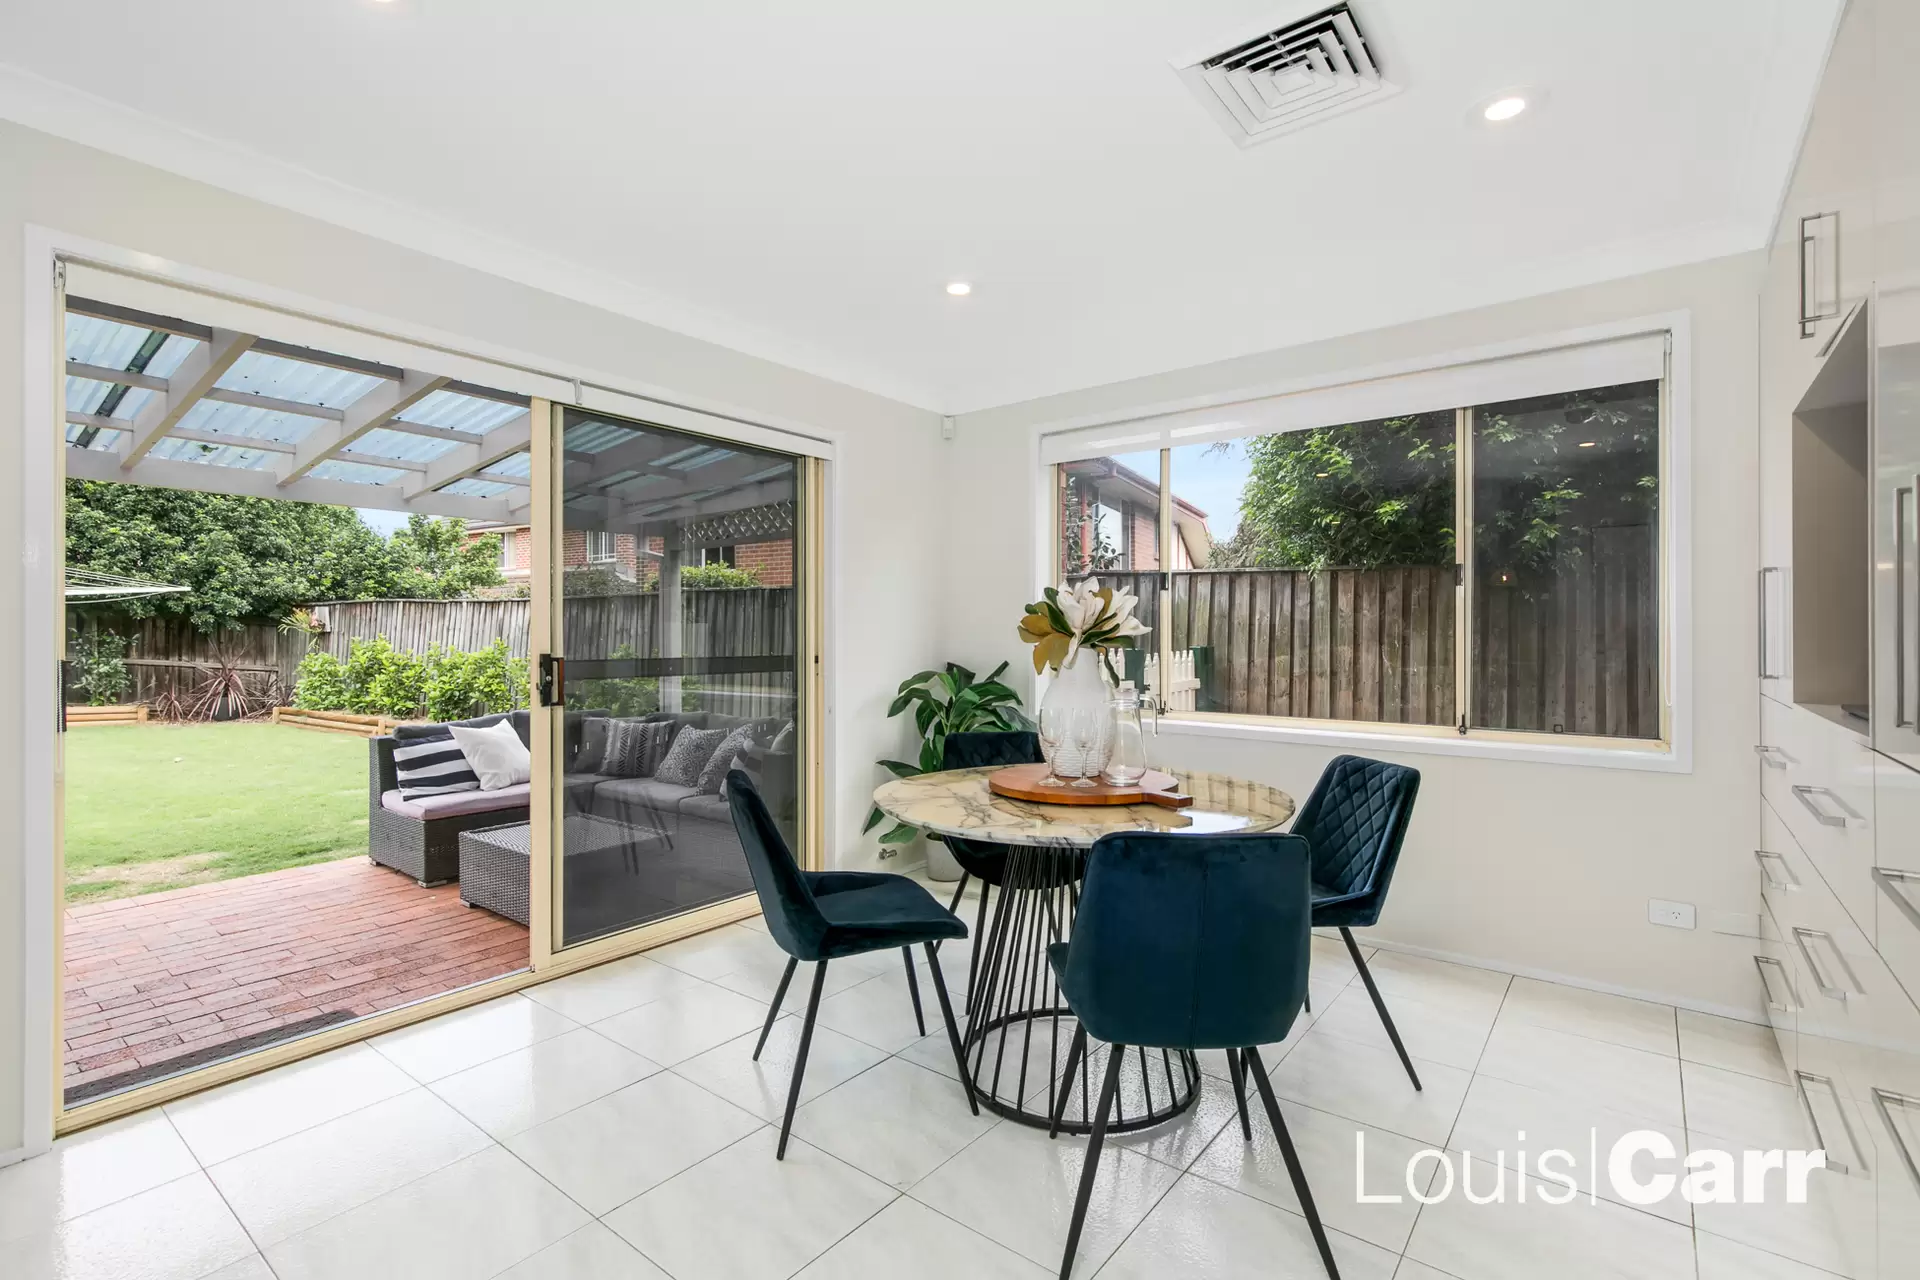 Photo #8: 4 Bowen Close, Cherrybrook - Sold by Louis Carr Real Estate